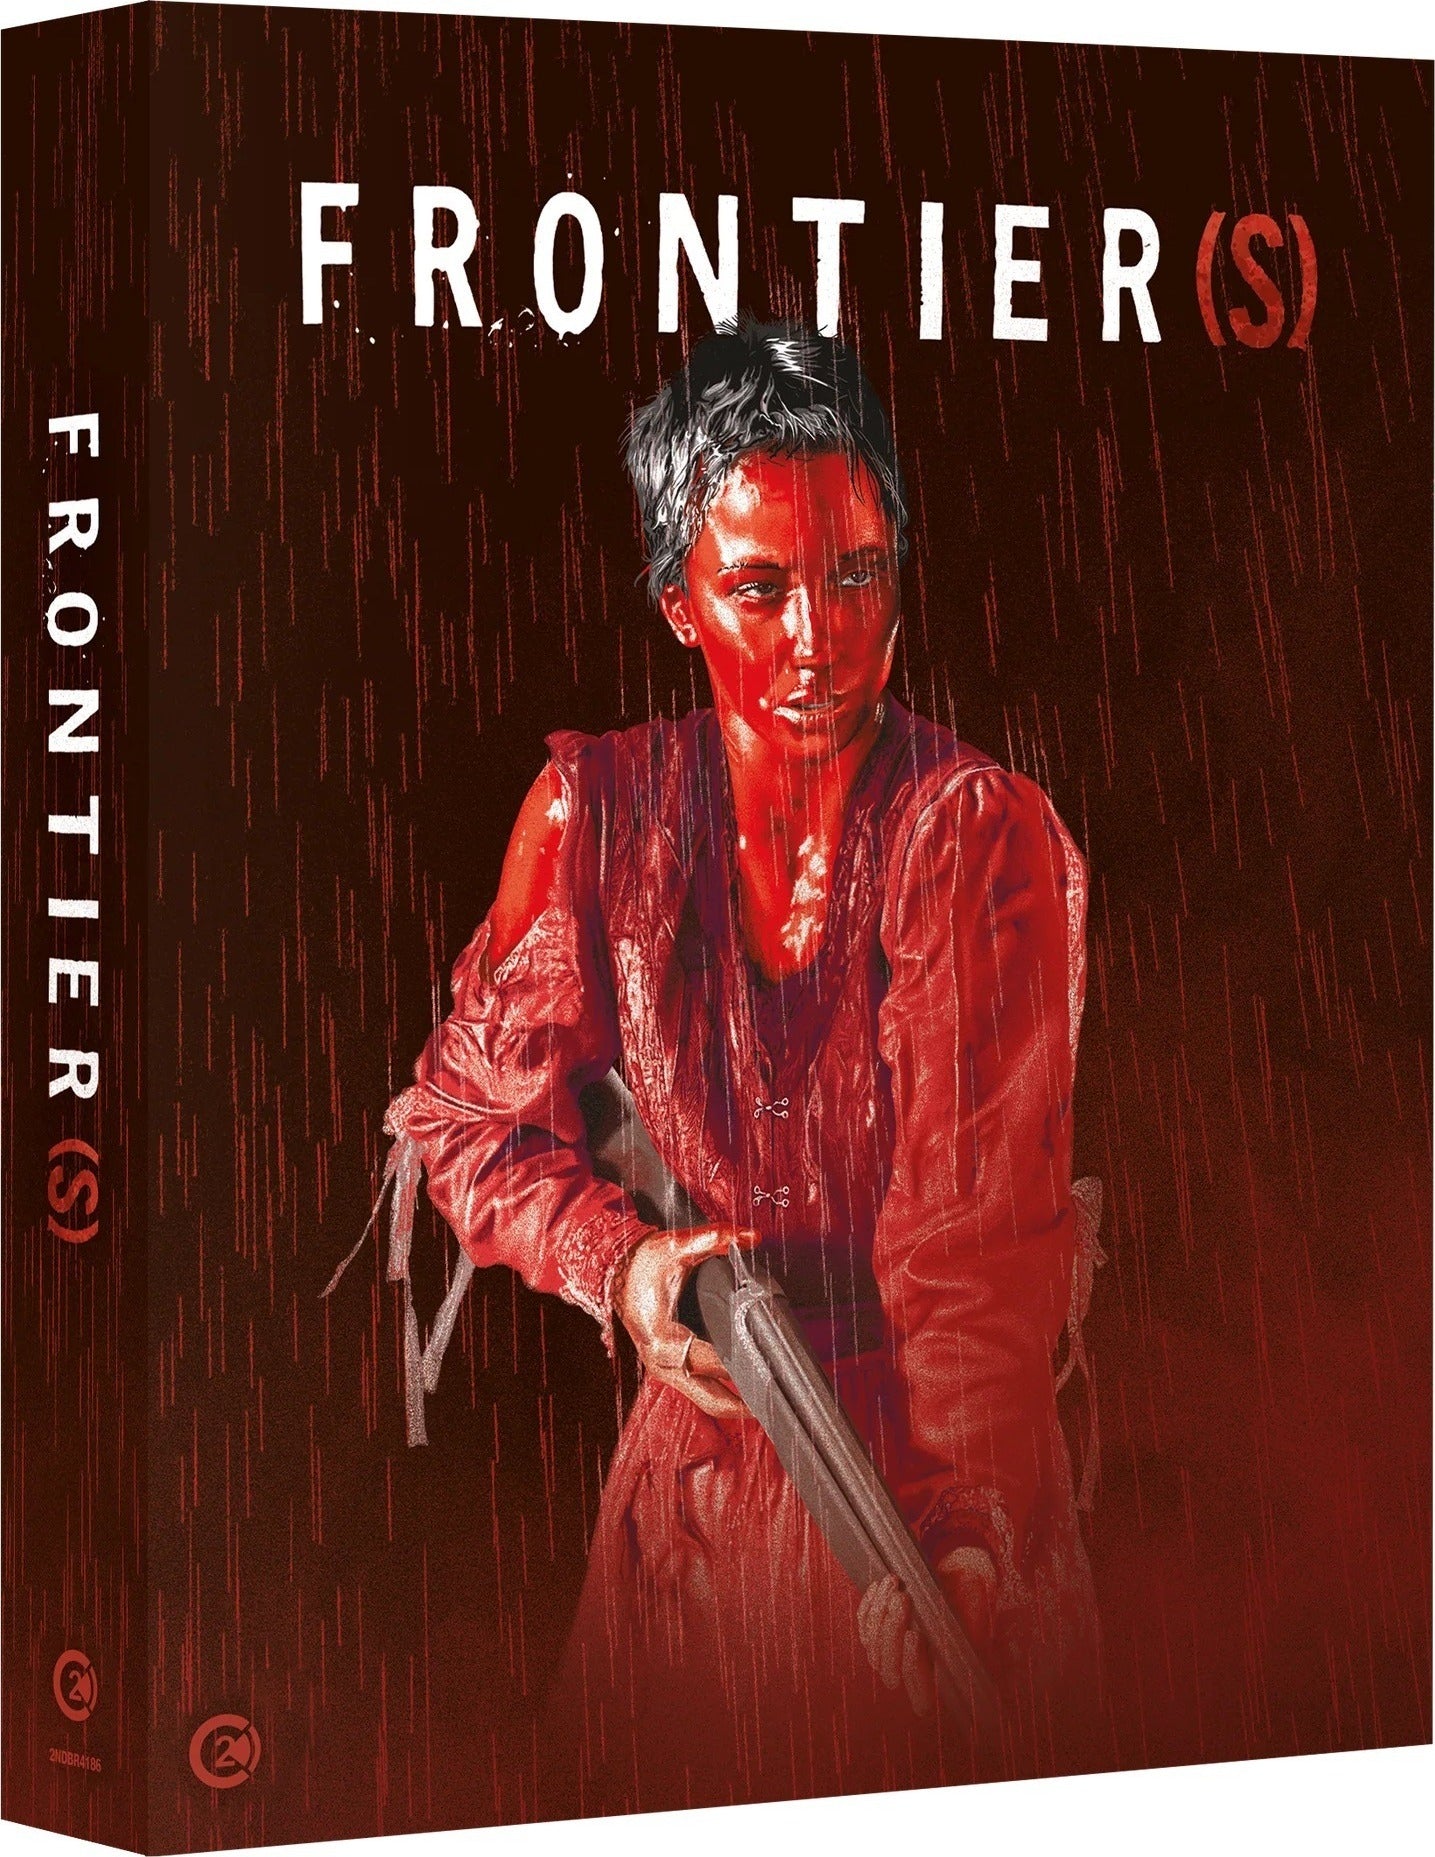 FRONTIER(S) (REGION B  IMPORT - LIMITED EDITION) BLU-RAY